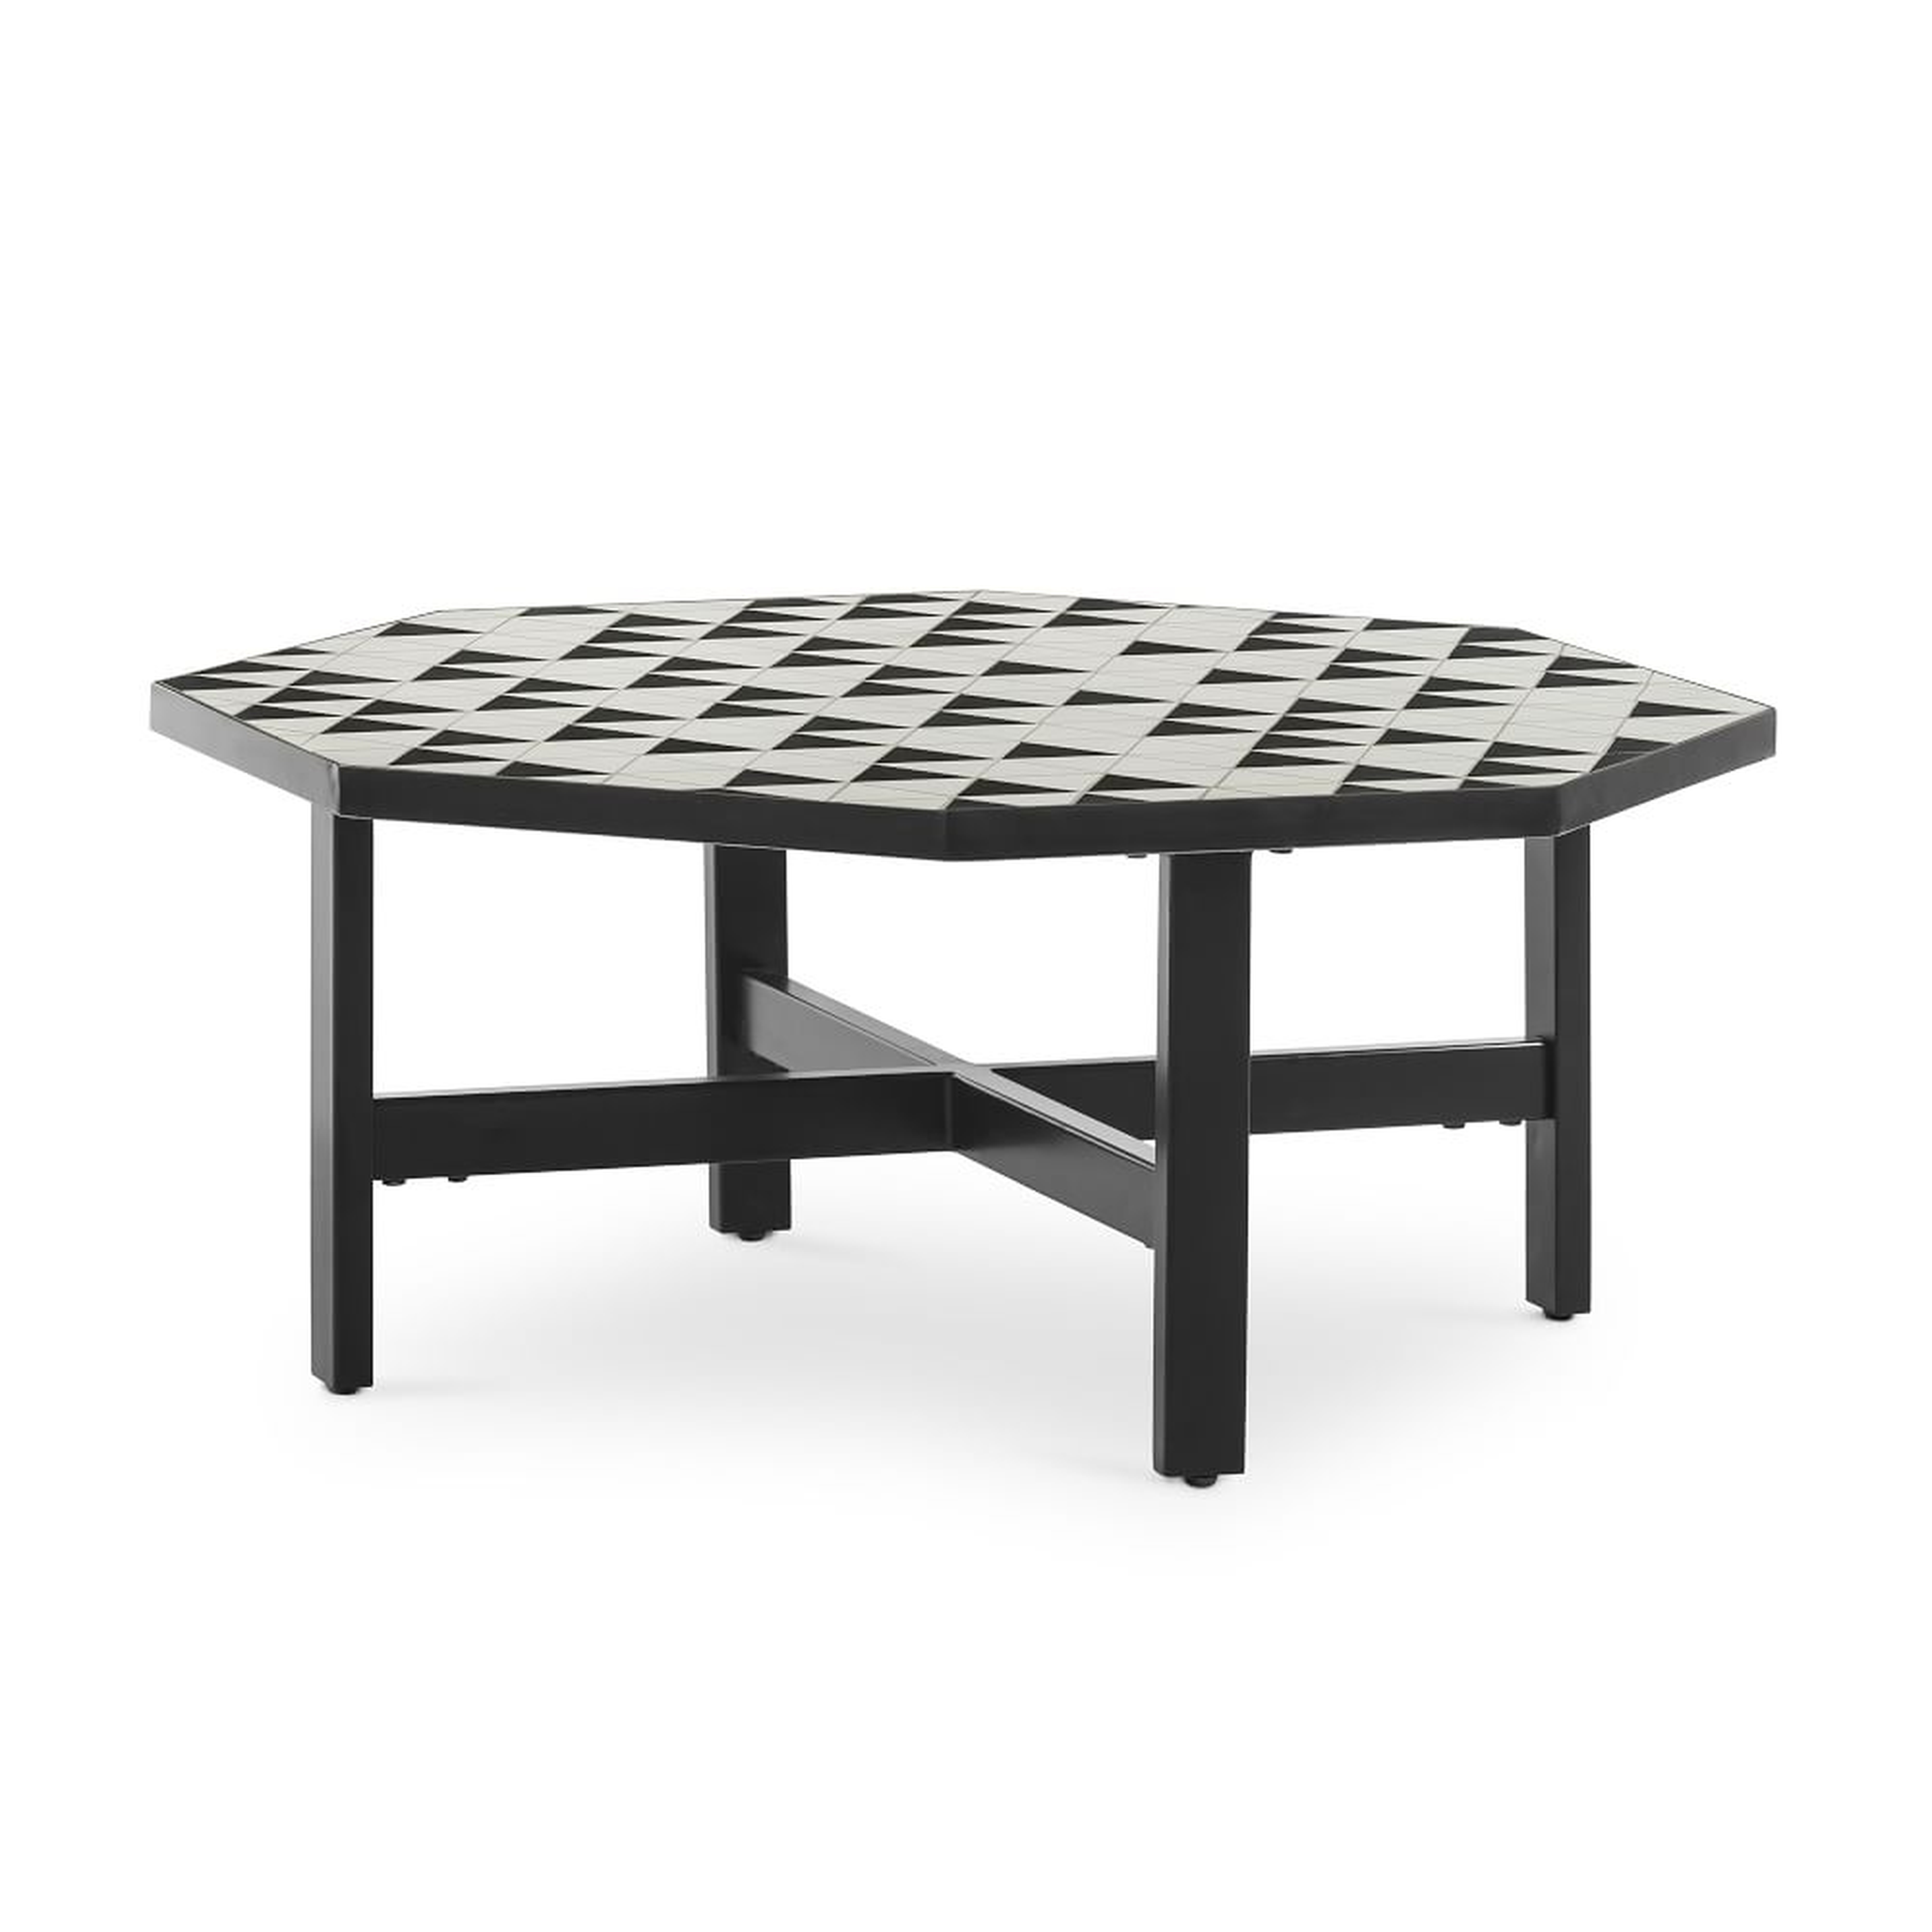 Black & White Tile Outdoor Coffee Table - West Elm